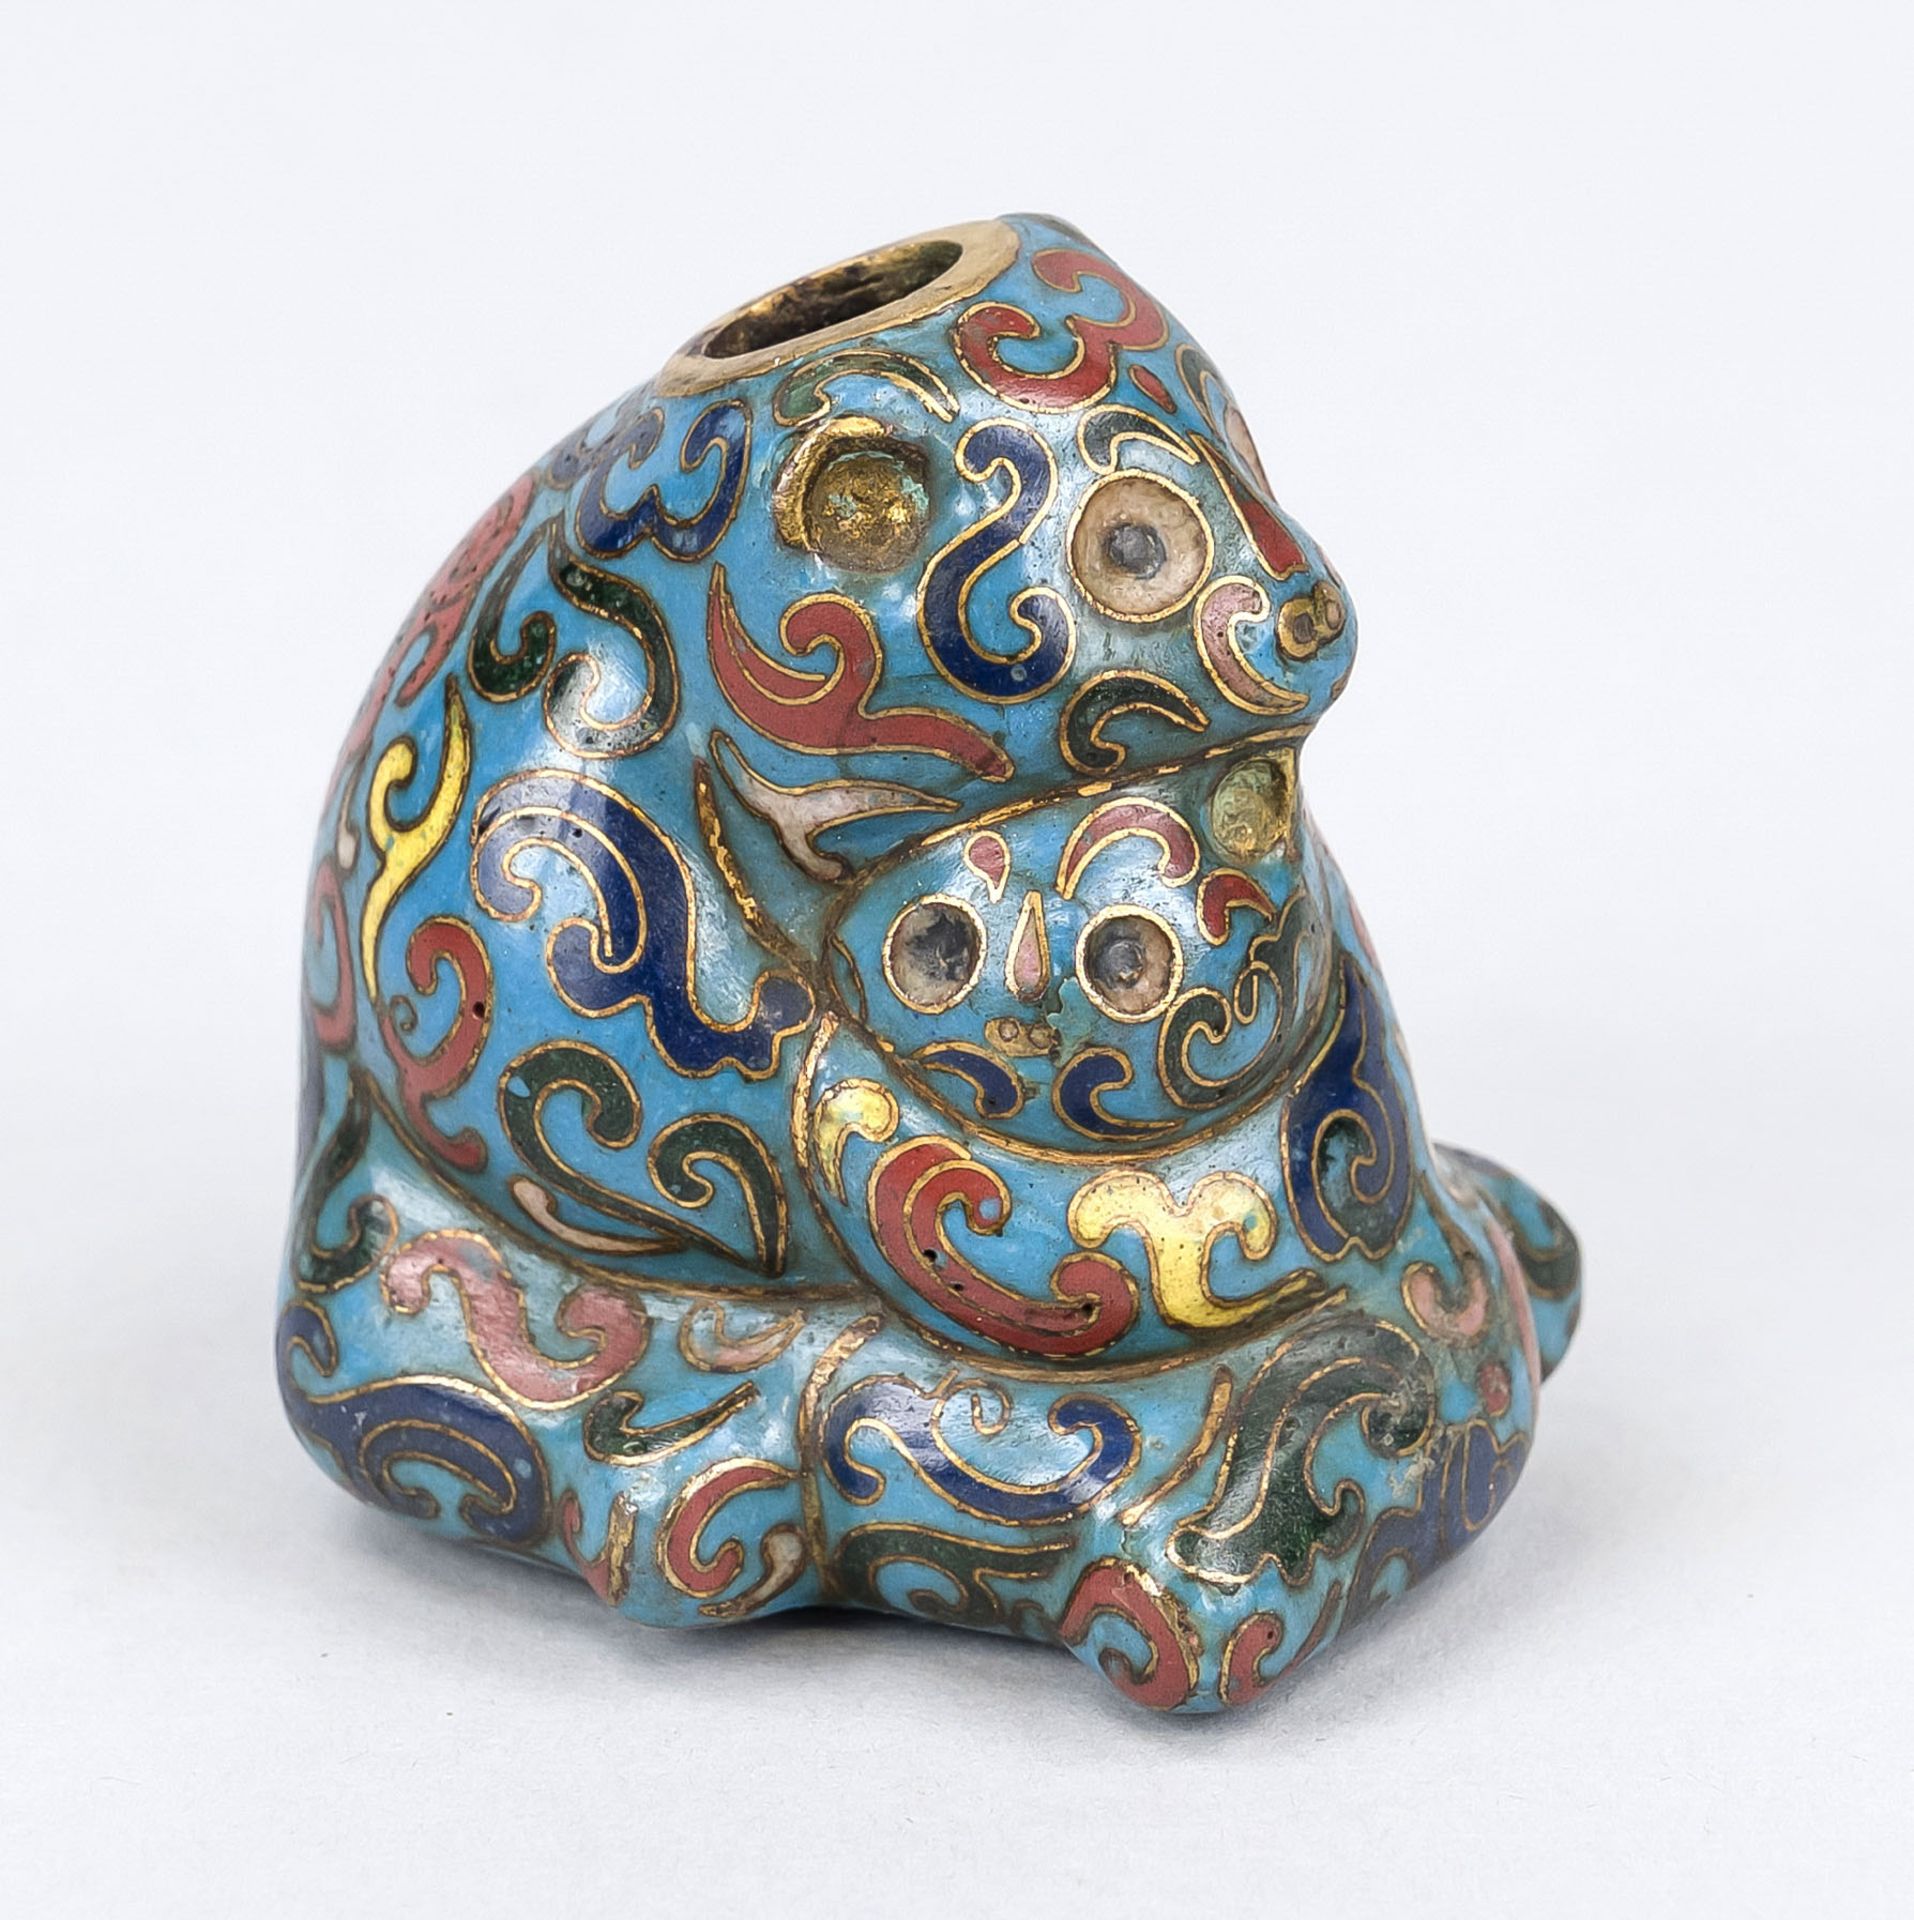 Cloisonné vessel for incense, China, 19th century (Qing). Figural in the form of a seated panda